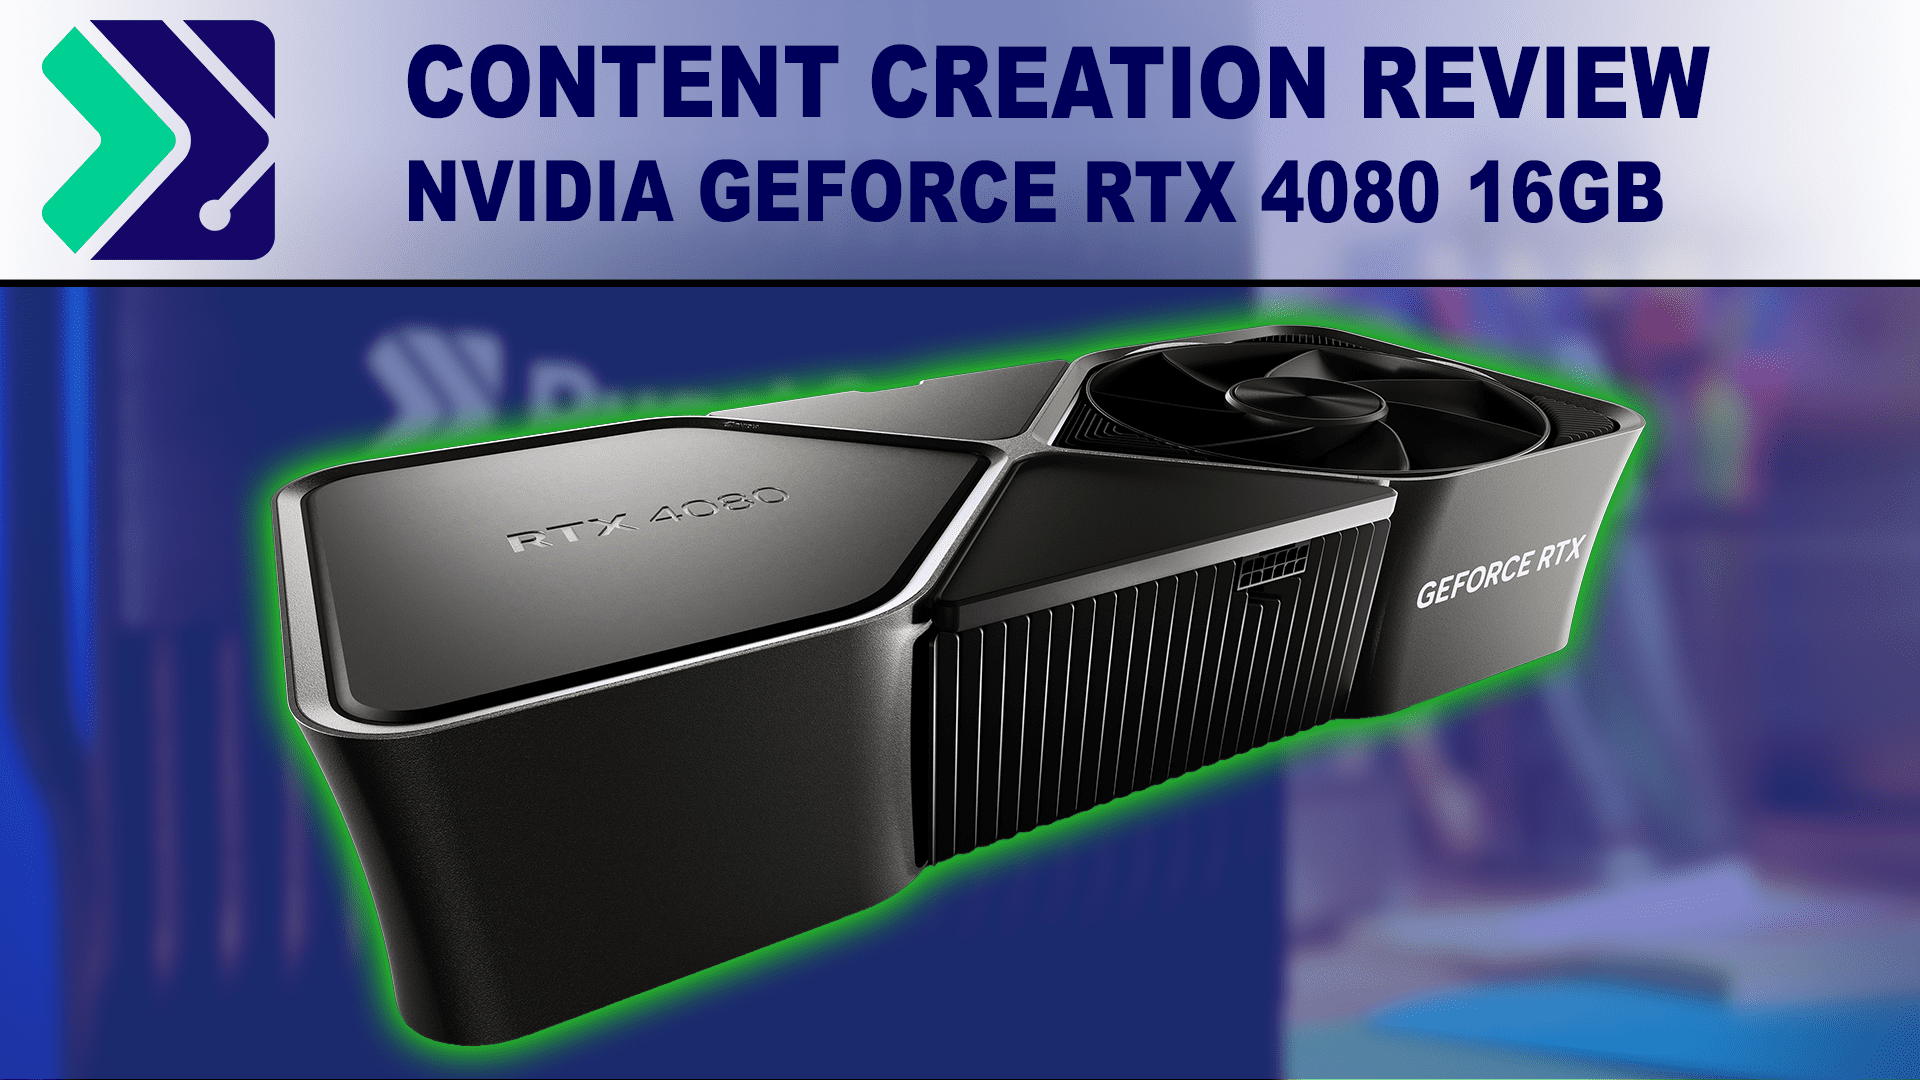 NVIDIA GeForce RTX 4080 16GB Content Creation Review